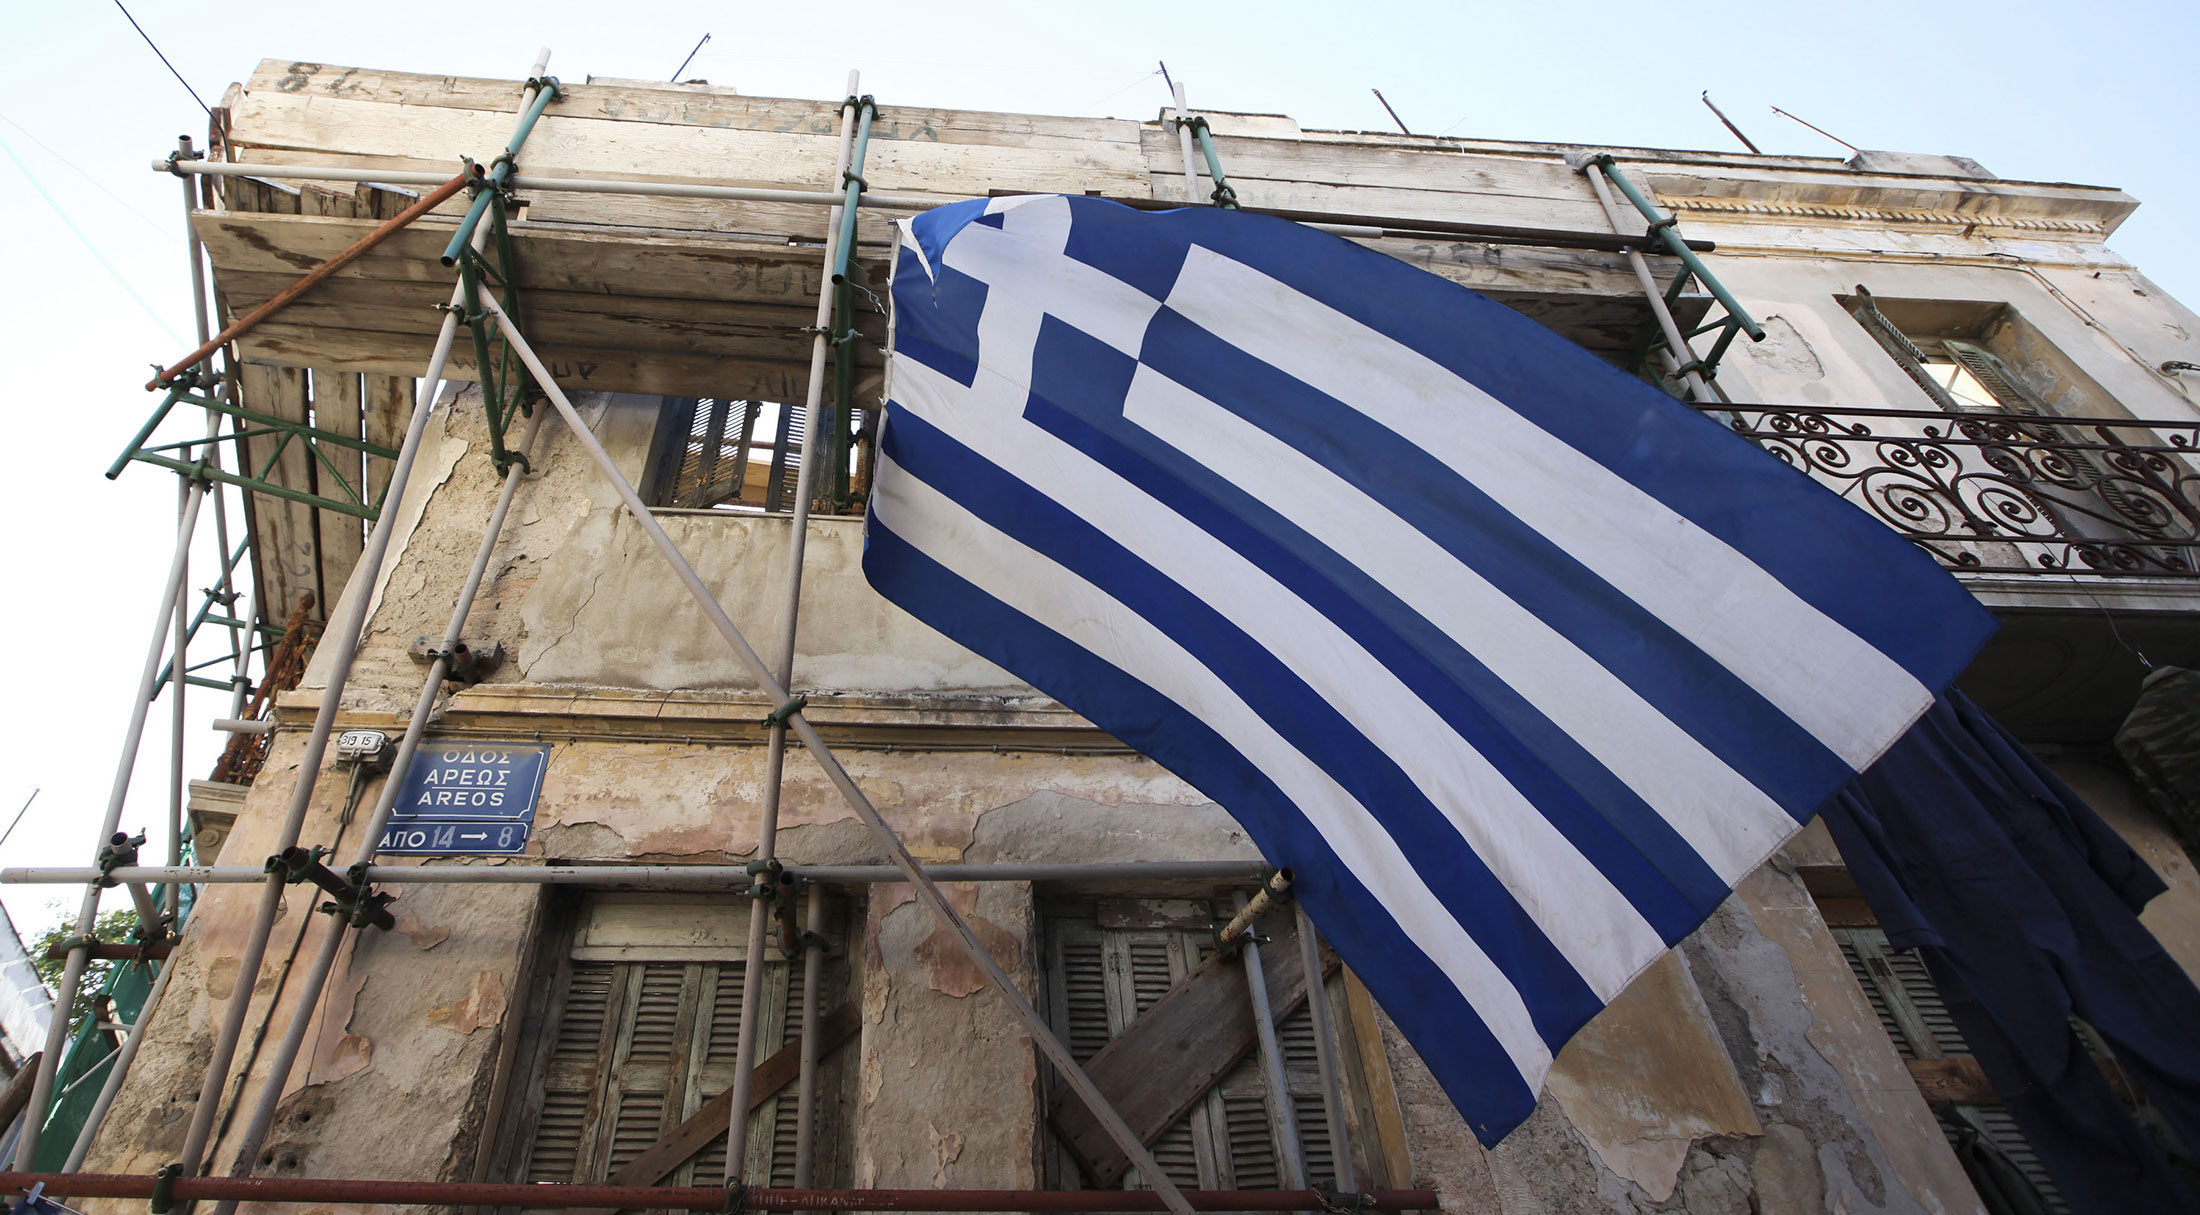 A Greek national flag flies from scaffolding outside an old building in the Plaka district of Athens, Greece, on Thursday, June 14, 2012. Greeks head to the ballot box in two days for a contest that may determine the fate of the world's first democracy and the future of the newest reserve currency, while roiling markets from Wellington to Wall Street.
